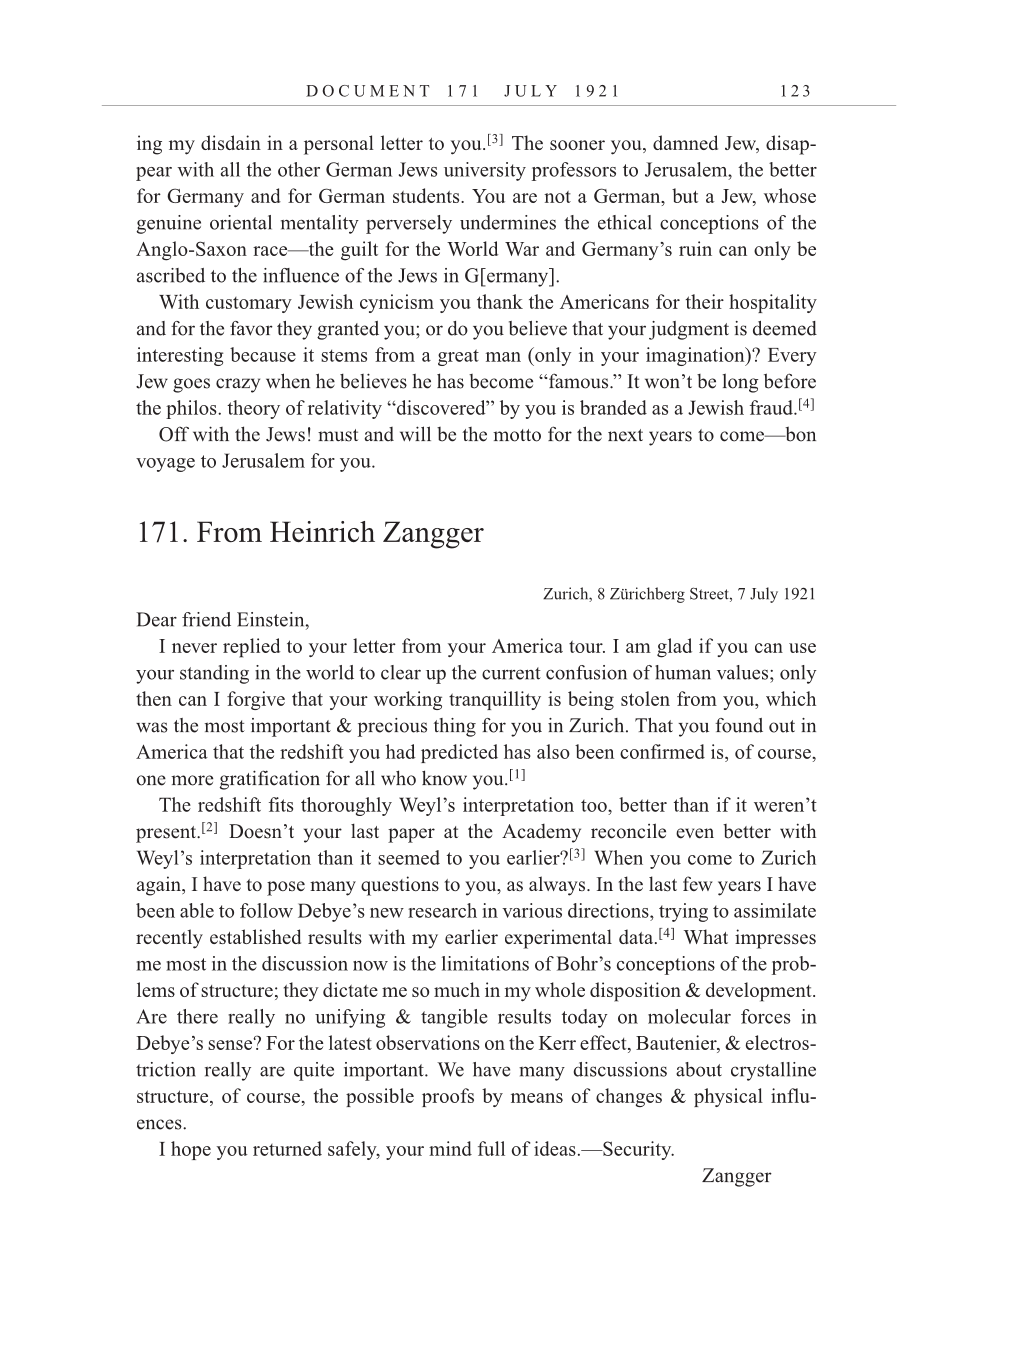 Volume 12: The Berlin Years: Correspondence, January-December 1921 (English translation supplement) page 123